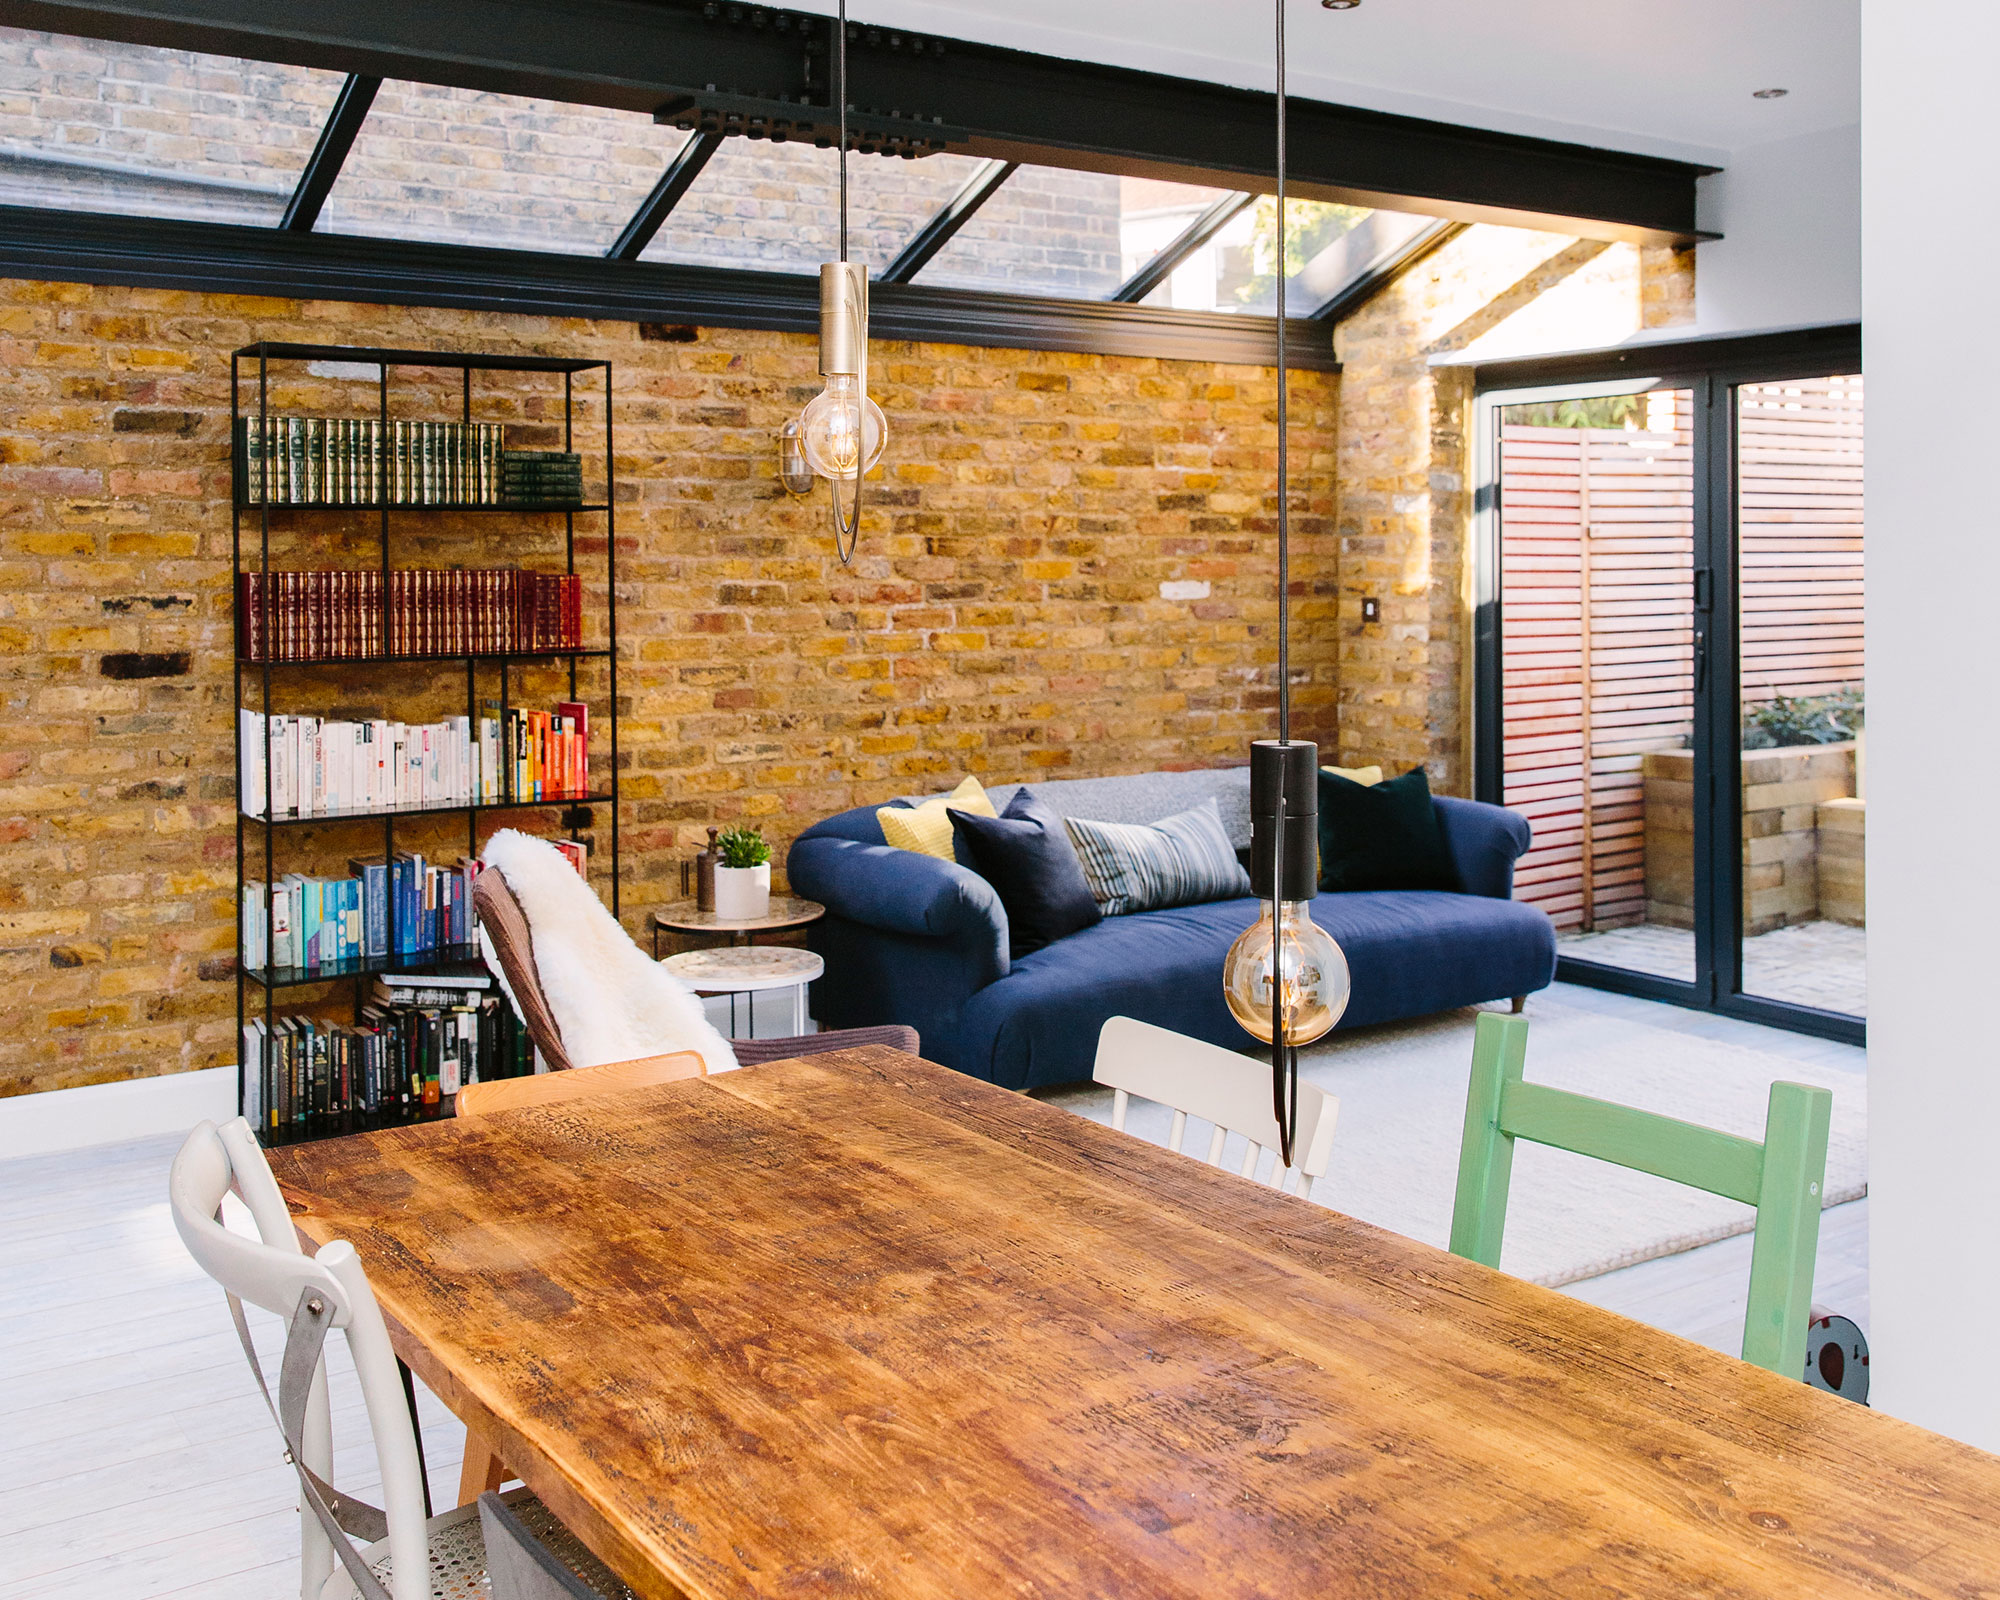 dining space with brick walls and wooden dining set